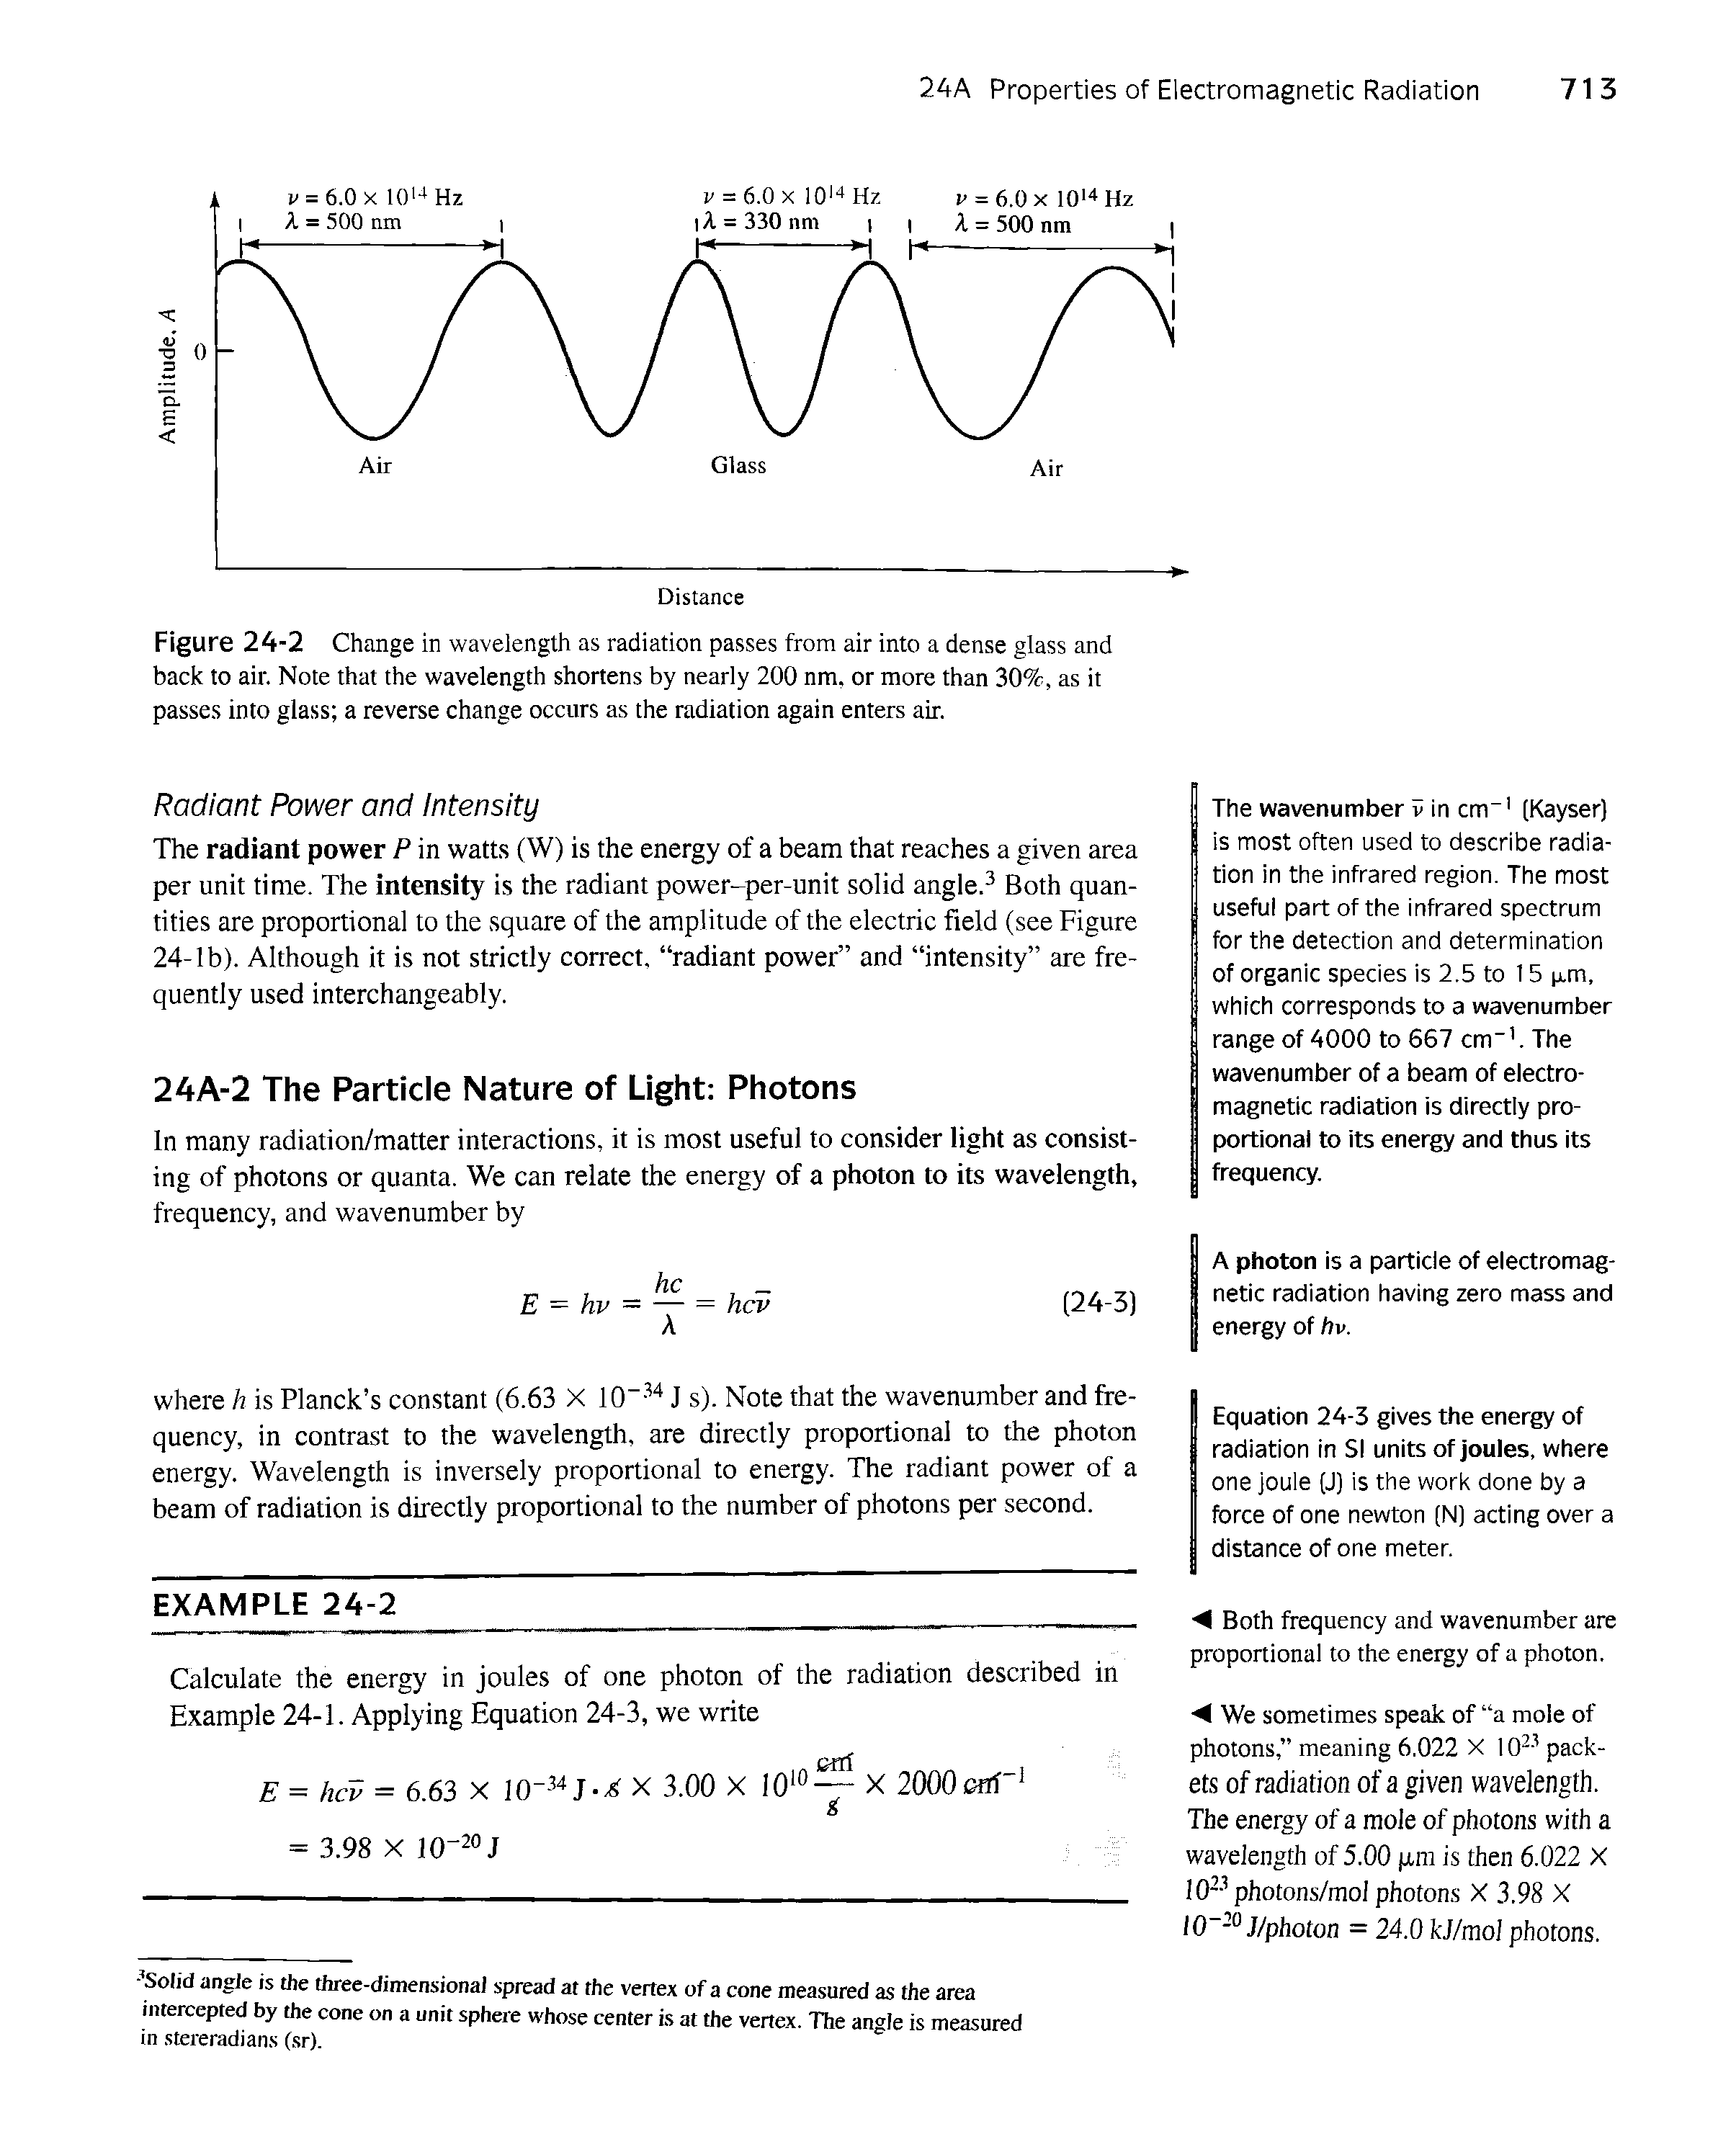 Figure 24-2 Change in wavelength as radiation passes from air into a dense glass and back to air. Note that the wavelength shortens by nearly 200 nm, or more than 30%, as it passes into glass a reverse change occurs as the radiation again enters air.